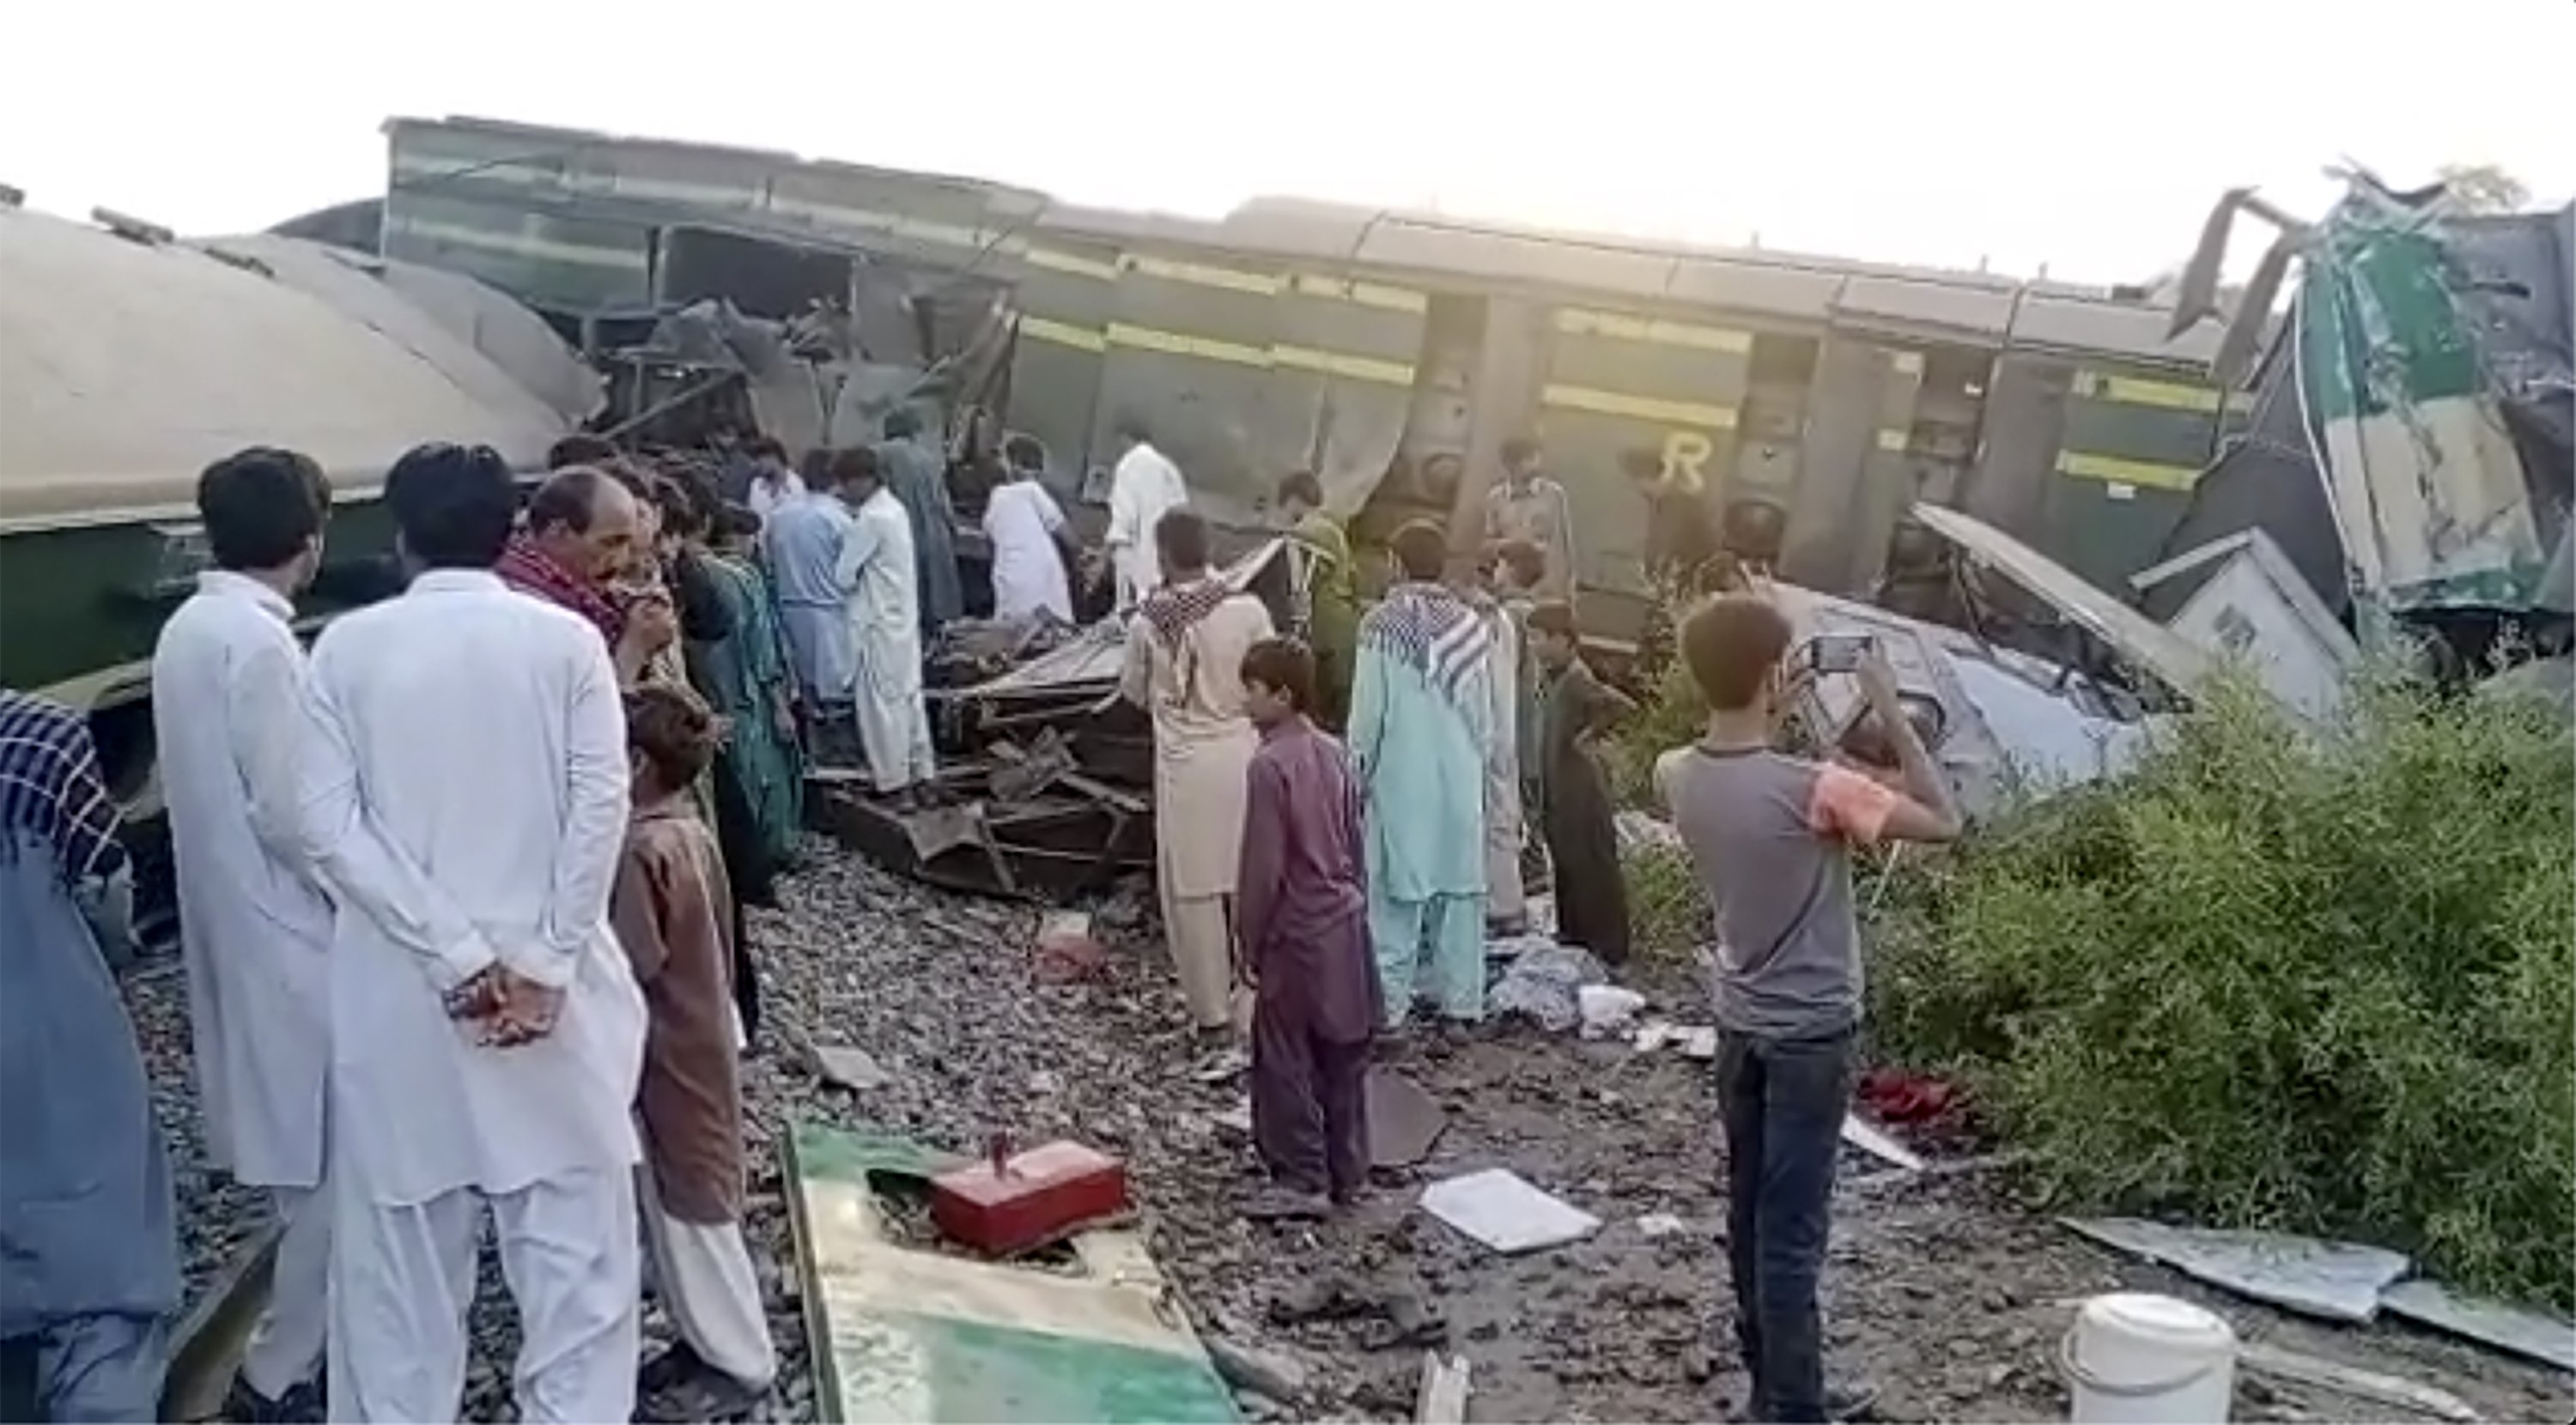 In this image from a video, people gather at the site of a train collision in Ghotki, Pakistan, on Monday, June 7, 2021. (AP Photo)